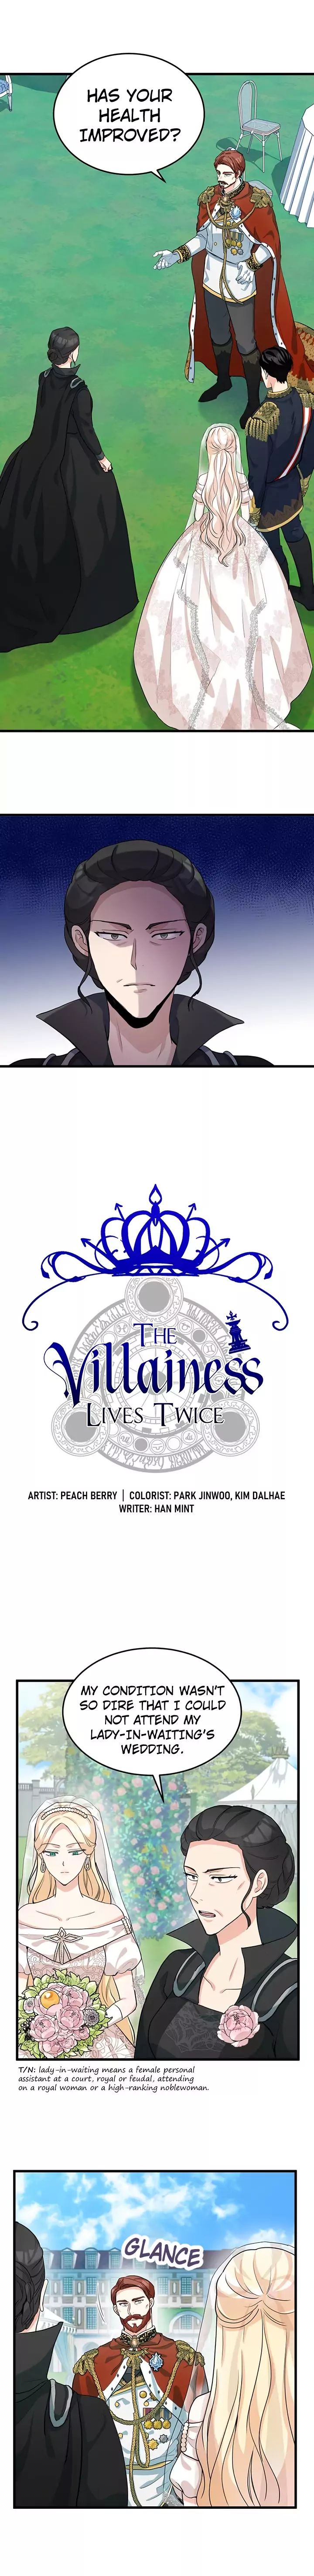 The Villainess Lives Twice 36 1